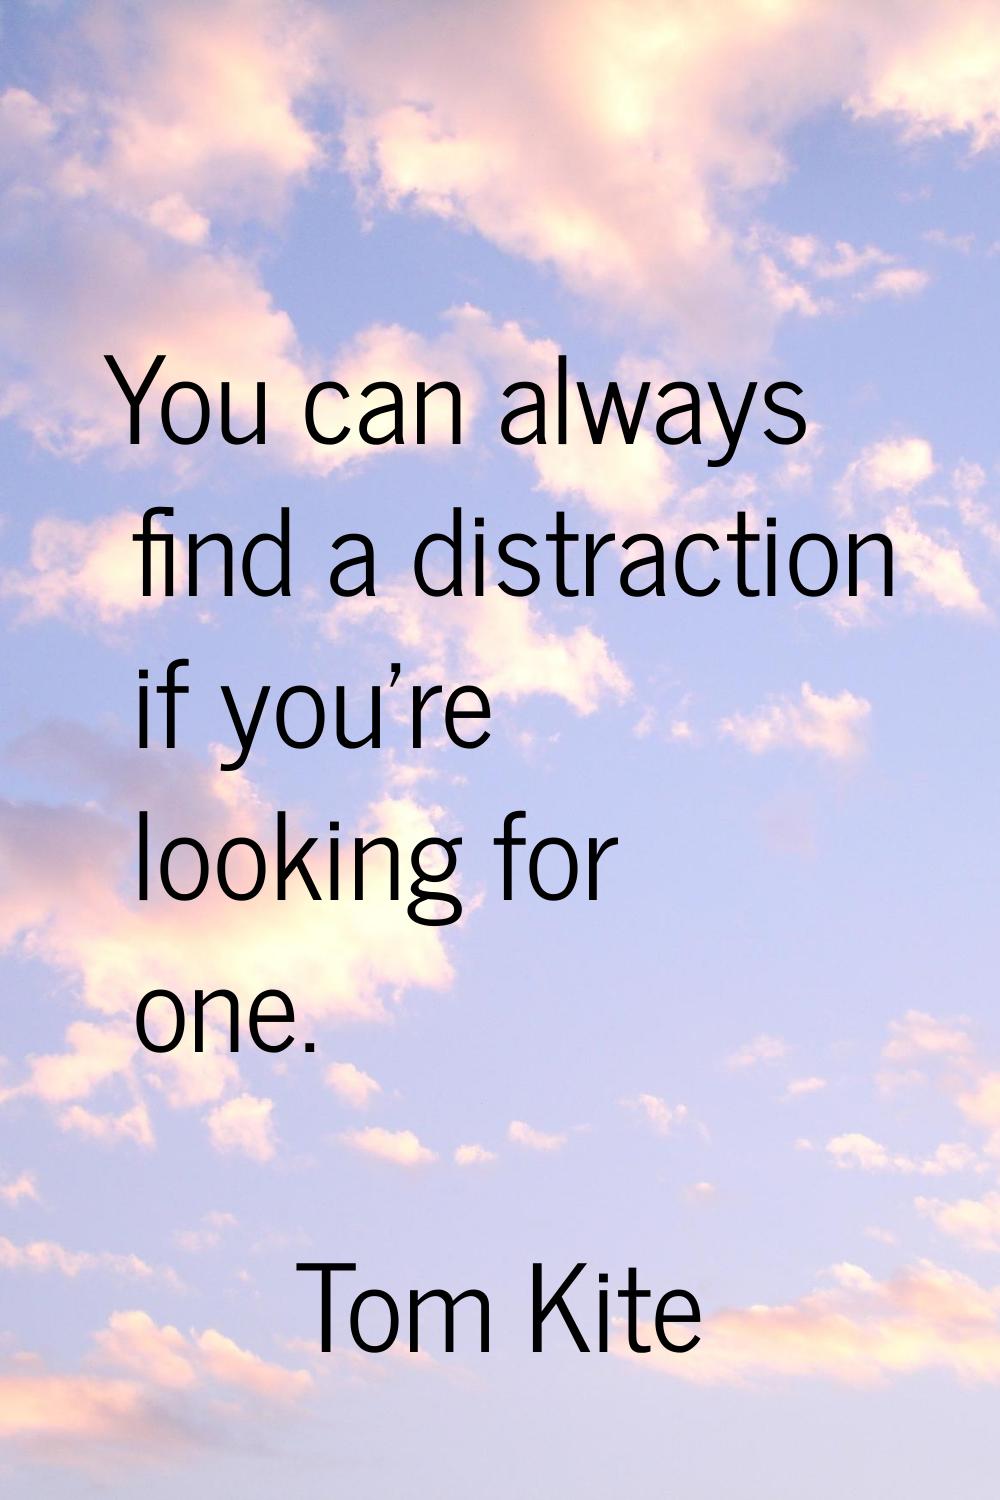 You can always find a distraction if you're looking for one.